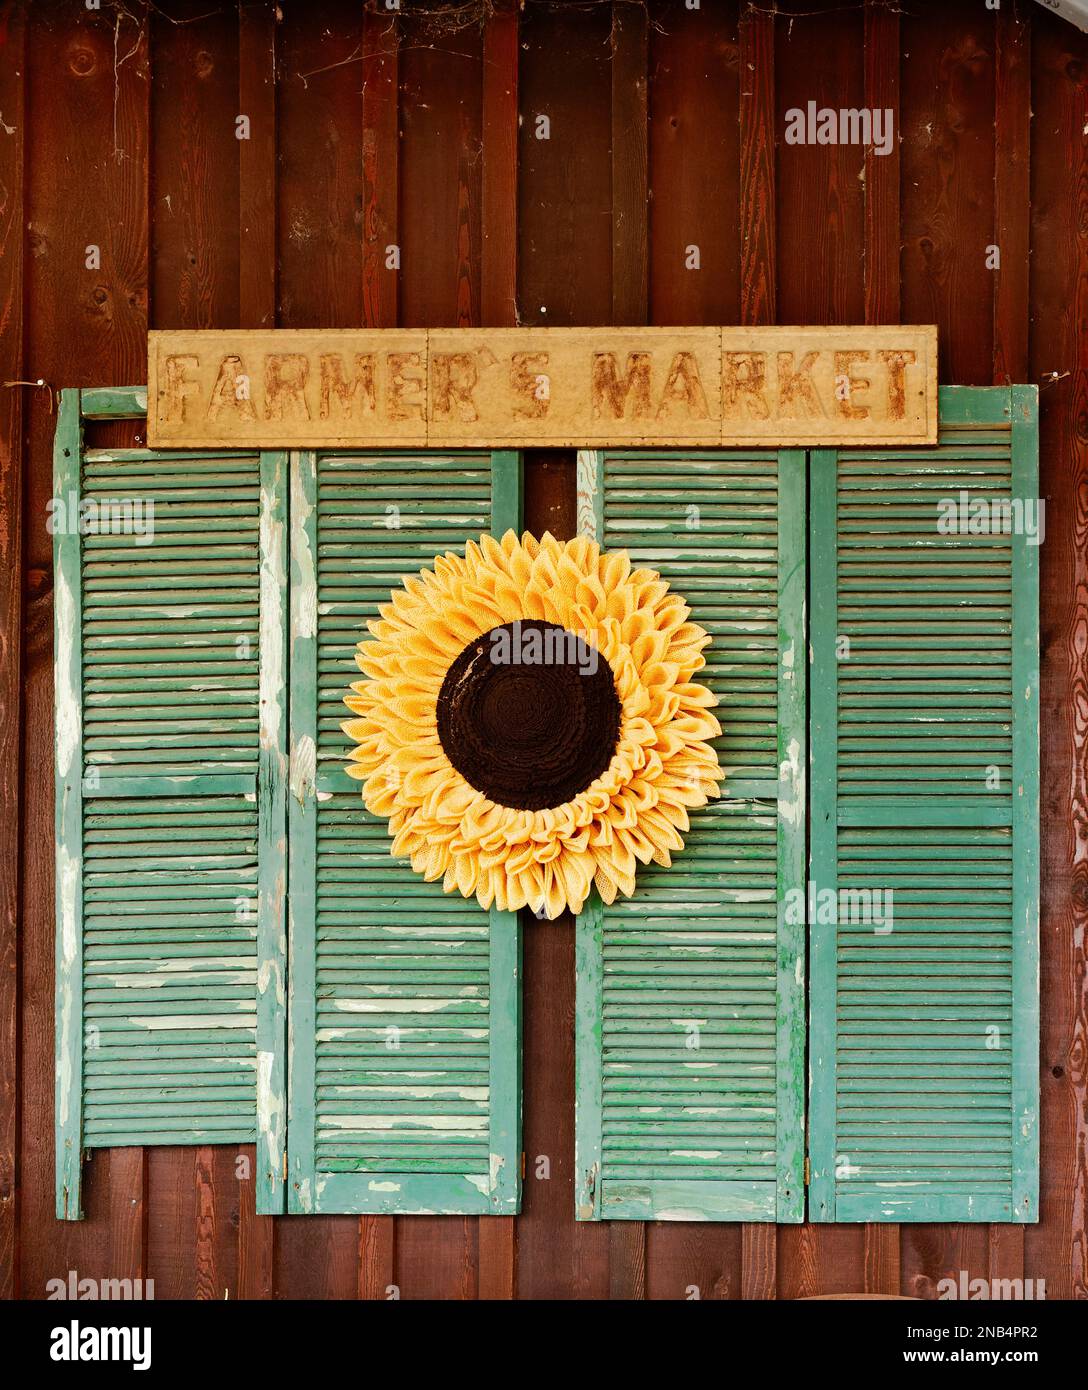 Farmer's Market advertising or marketing sign or signage on side of roadside country market in Pike Road Alabama, USA. Stock Photo